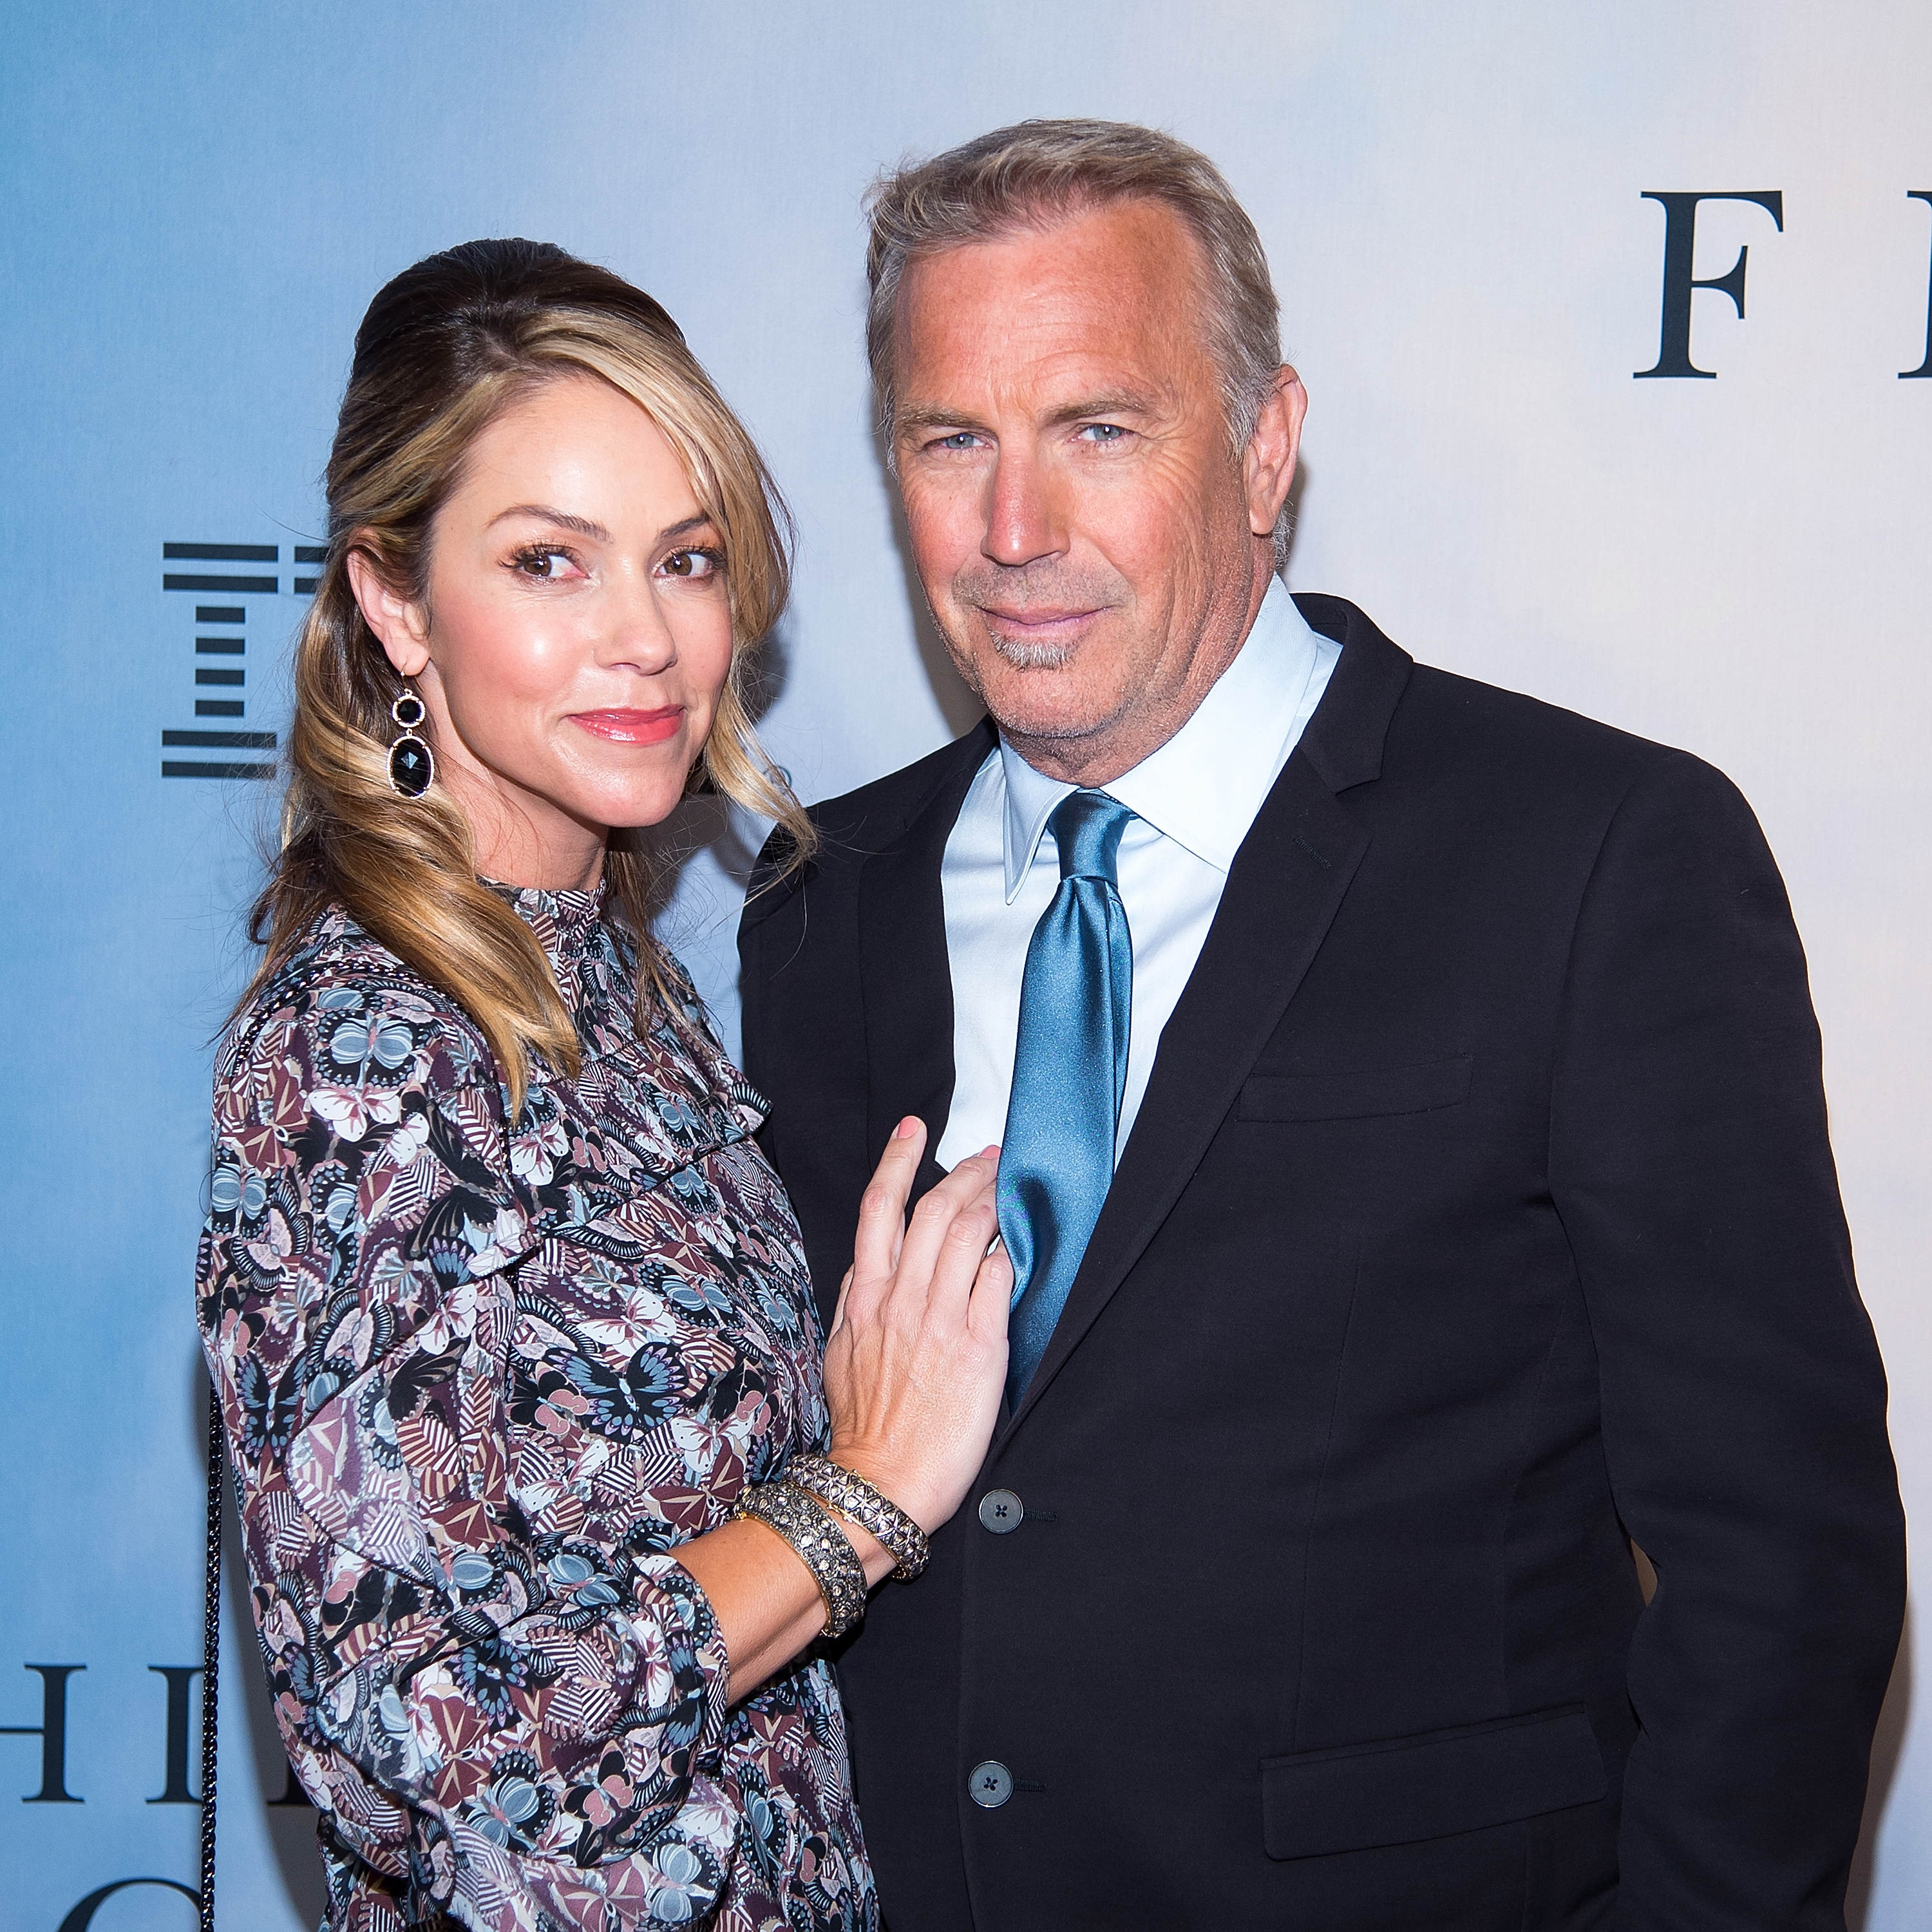 Christine Baumgartner and Kevin Costner at the "Hidden Figures" New York special screening on December 10, 2016 in New York City | Source: Getty Images